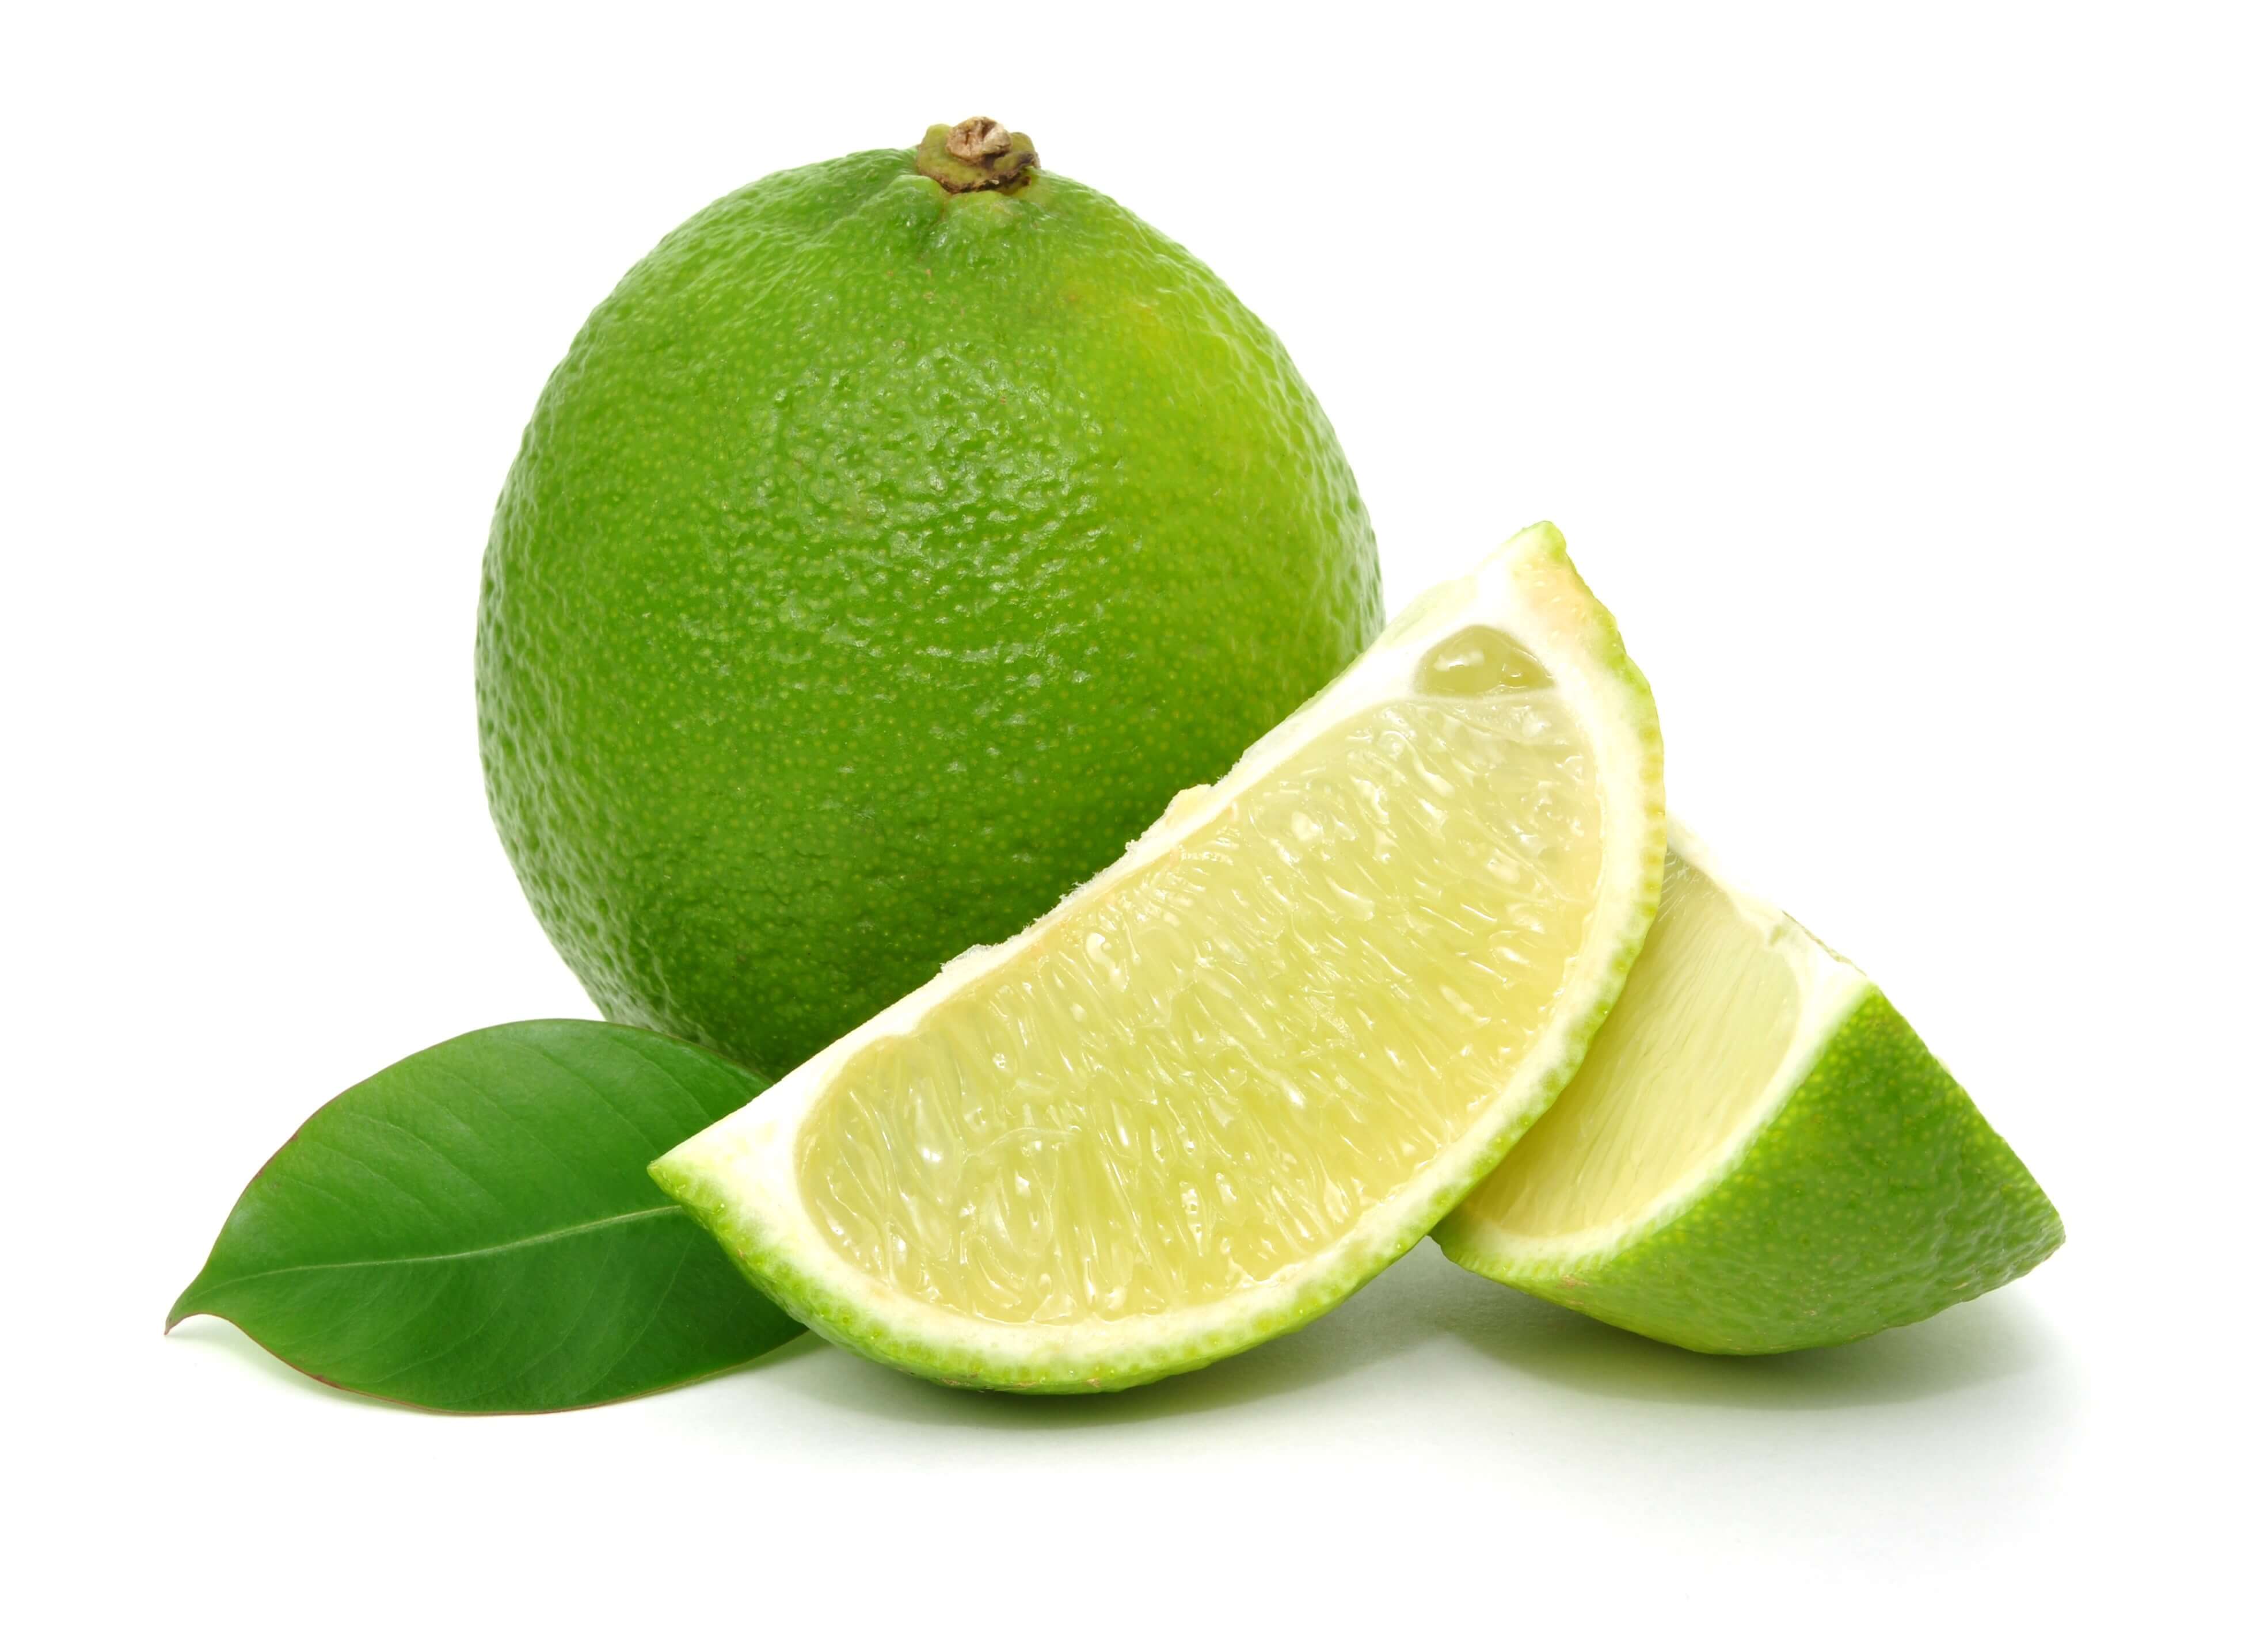 Health Benefits of Limes